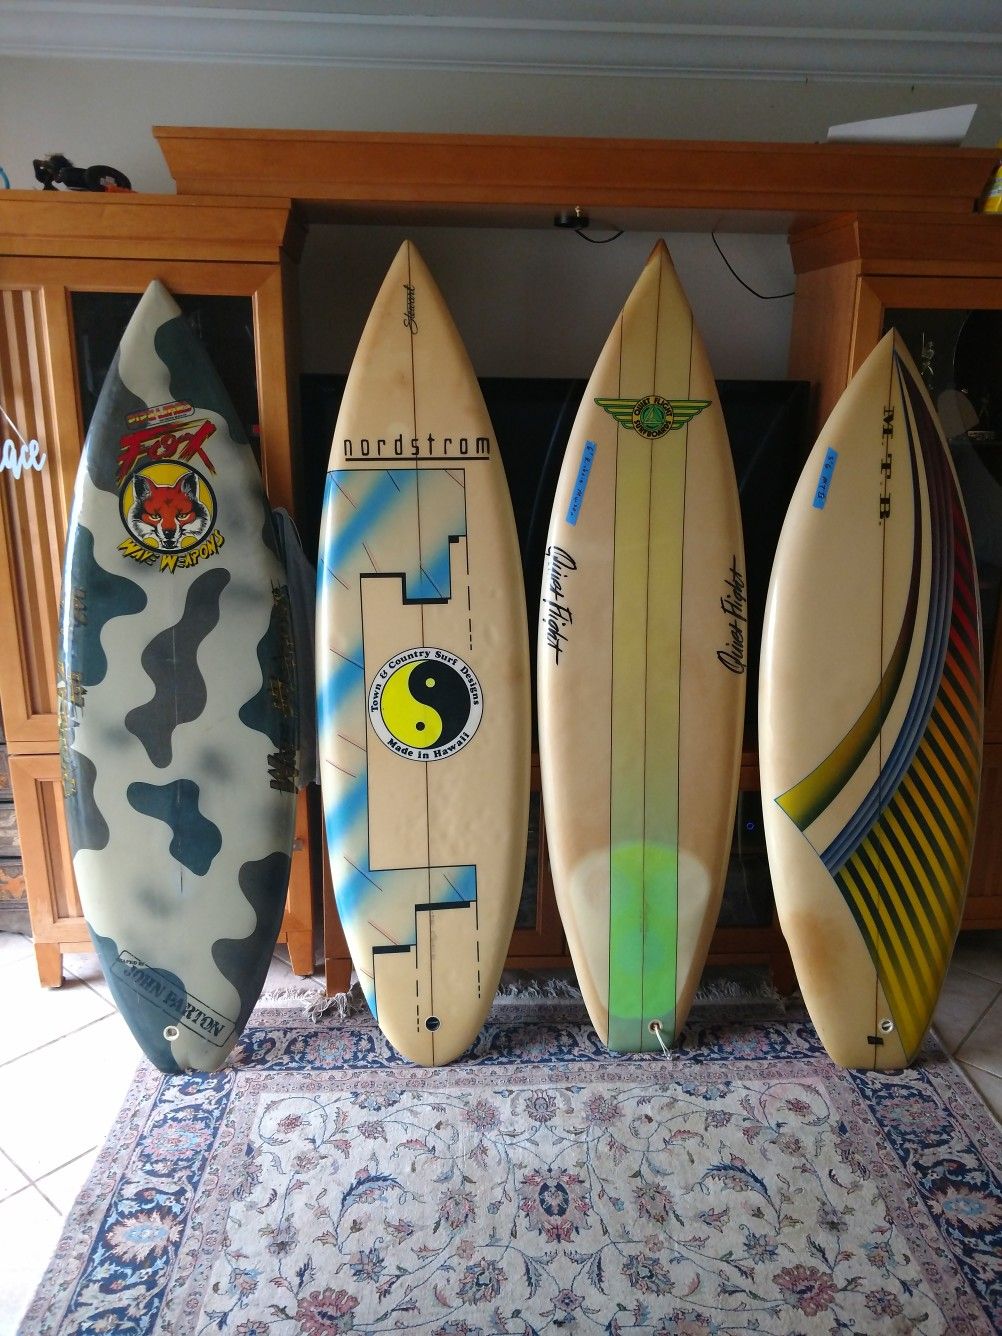 Surfboards. 1980s twin find. Sold the fox